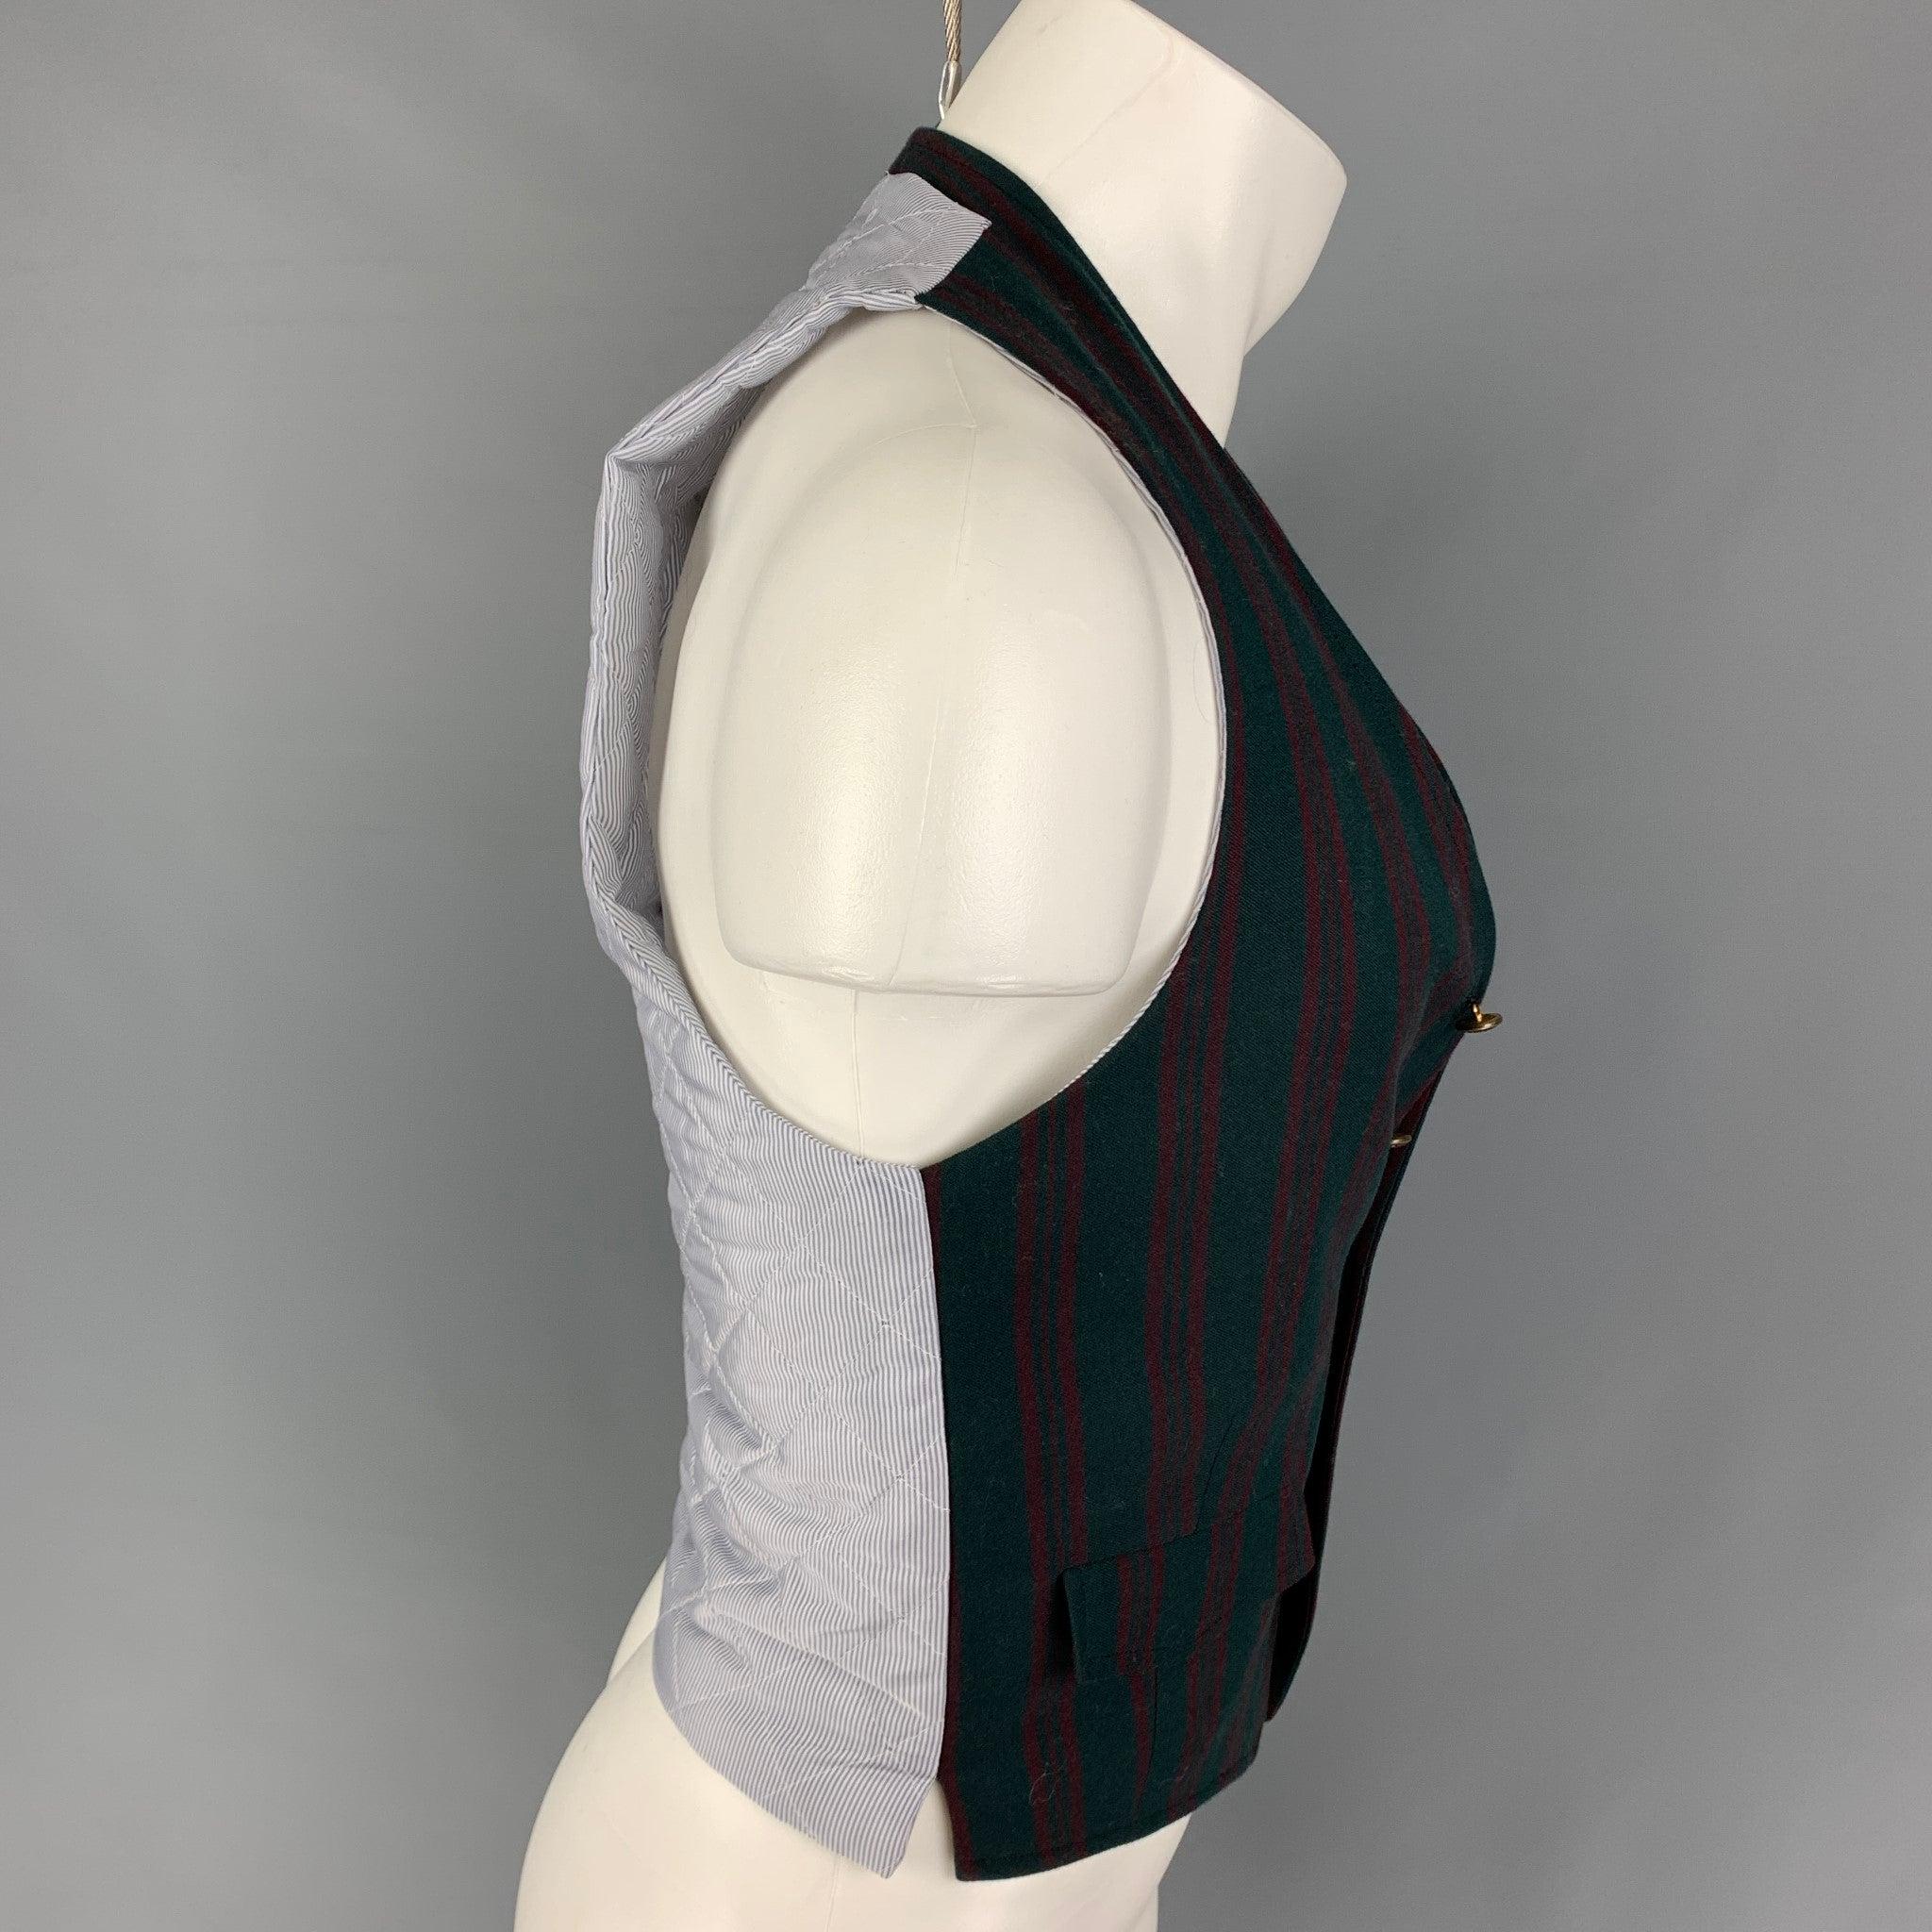 BAND OF OUTSIDERS vest comes in a green & burgundy stripe wool with a quilted back featuring flap pockets and a buttoned closure. Made in USA.
Very Good
Pre-Owned Condition. 

Marked:   2 

Measurements: 
 
Shoulder: 10.5 inches  Chest: 34 inches 